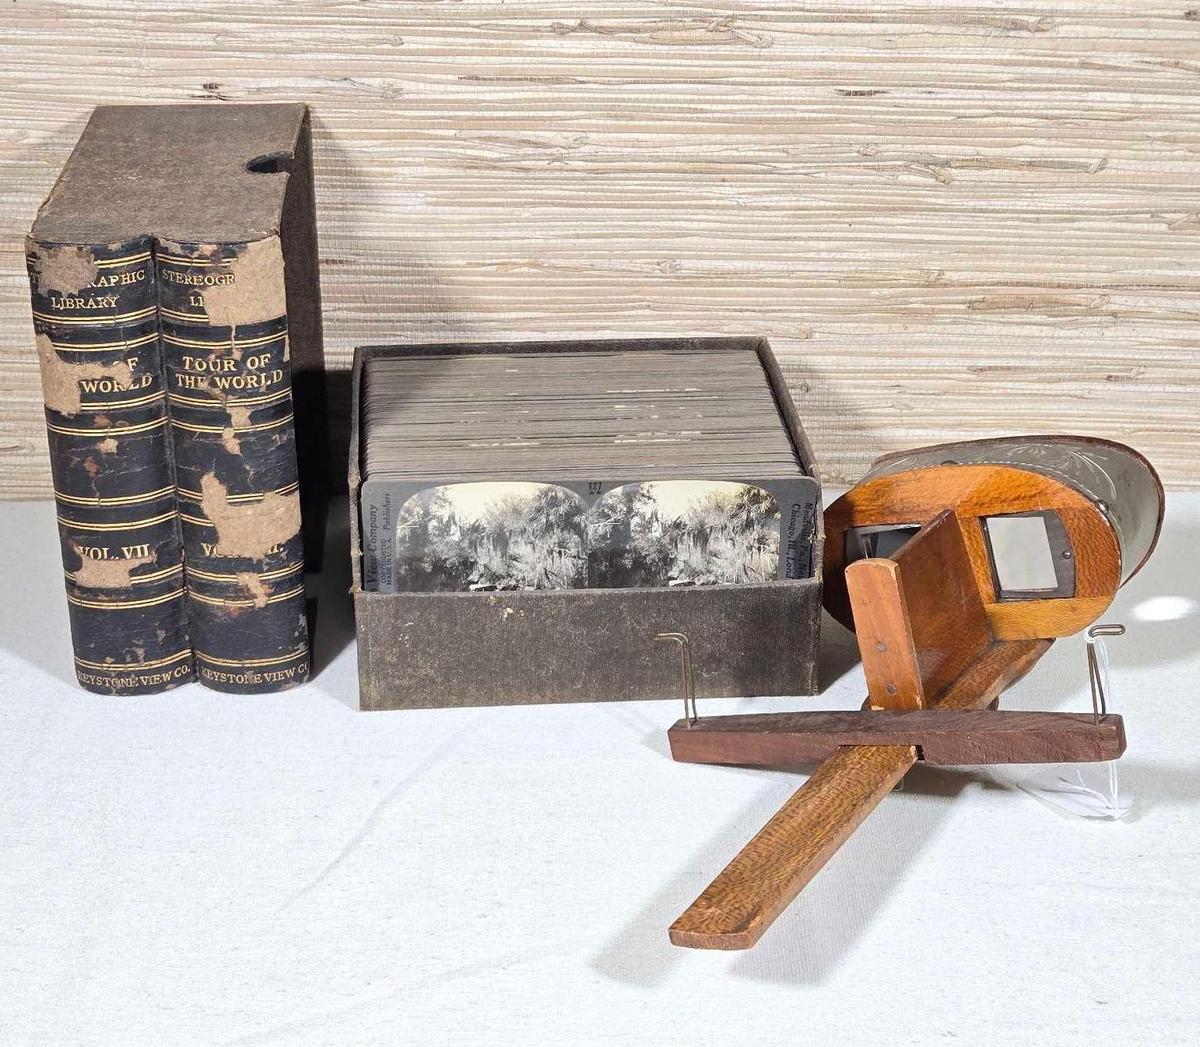 Antique Stereoscopic Viewer with Tour of The World Cards